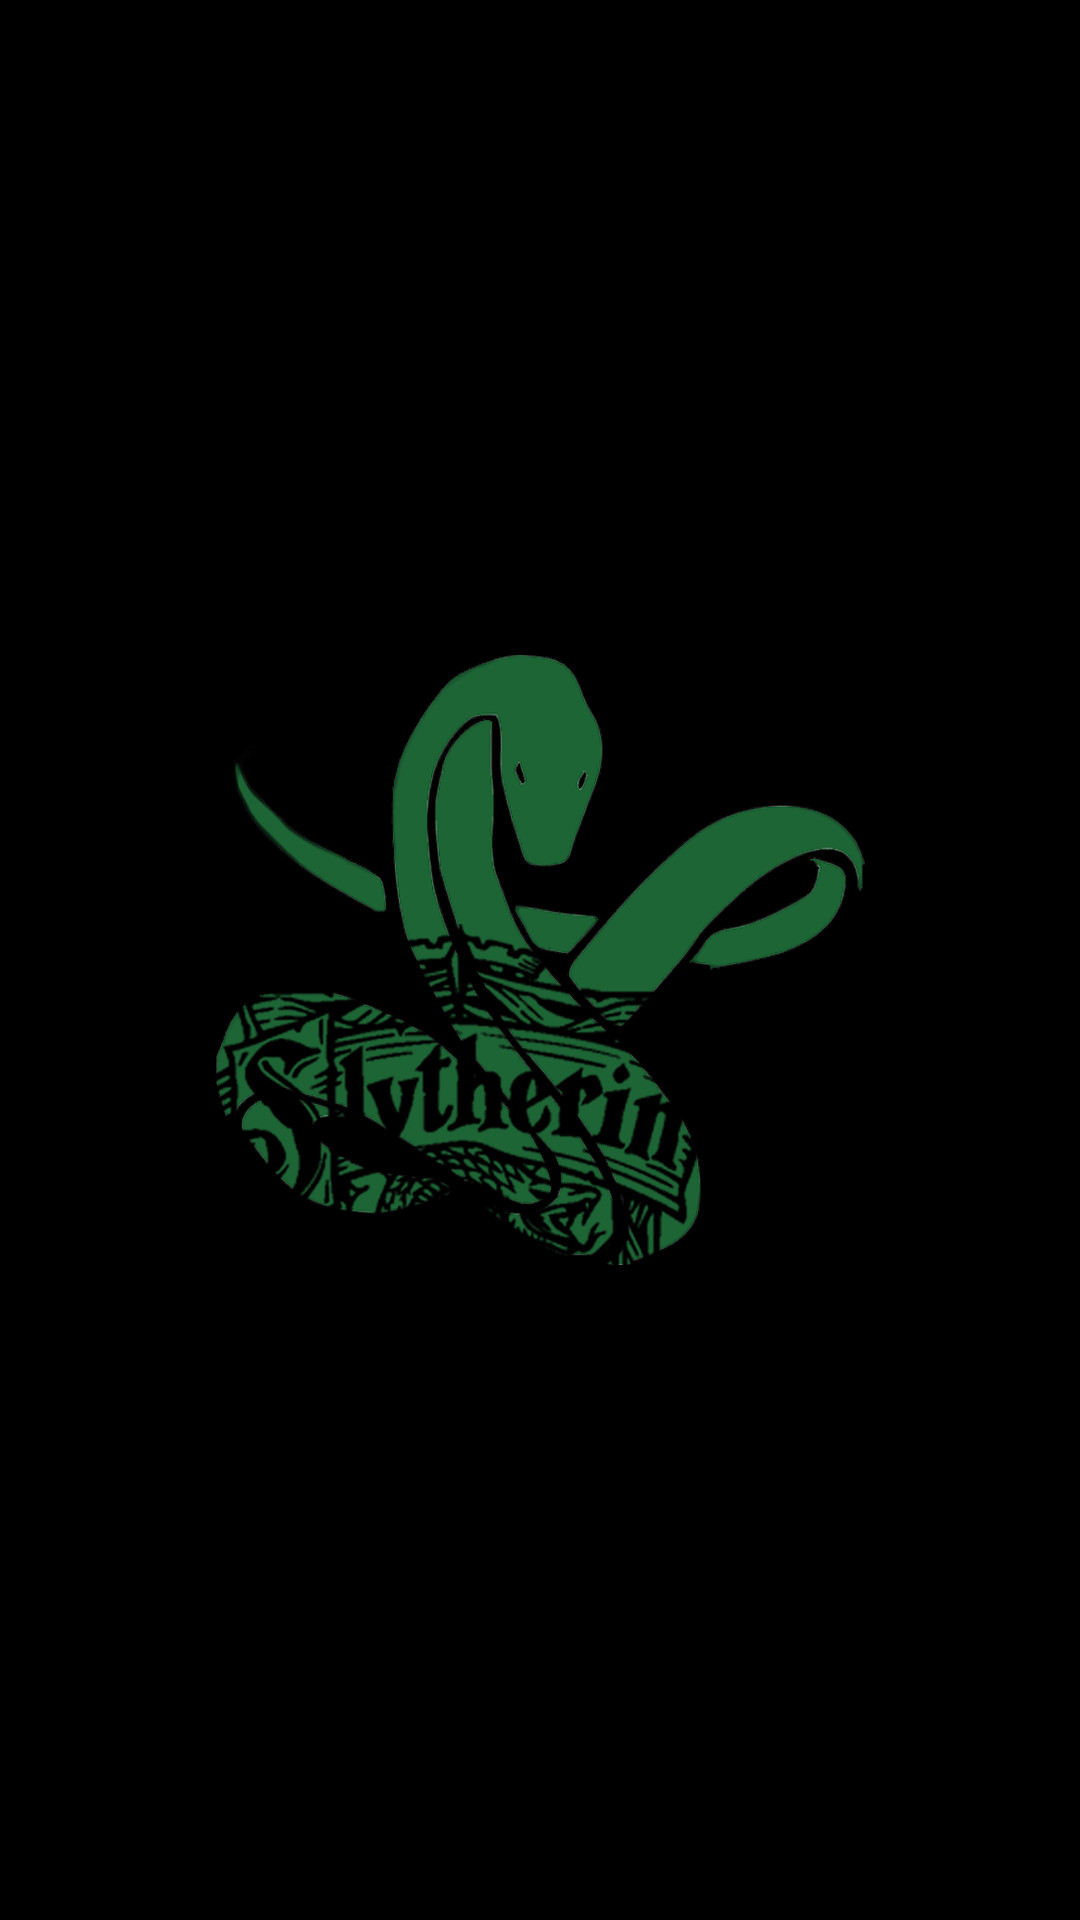 1080x1920 Slytherin Iphone 7 Wallpaper